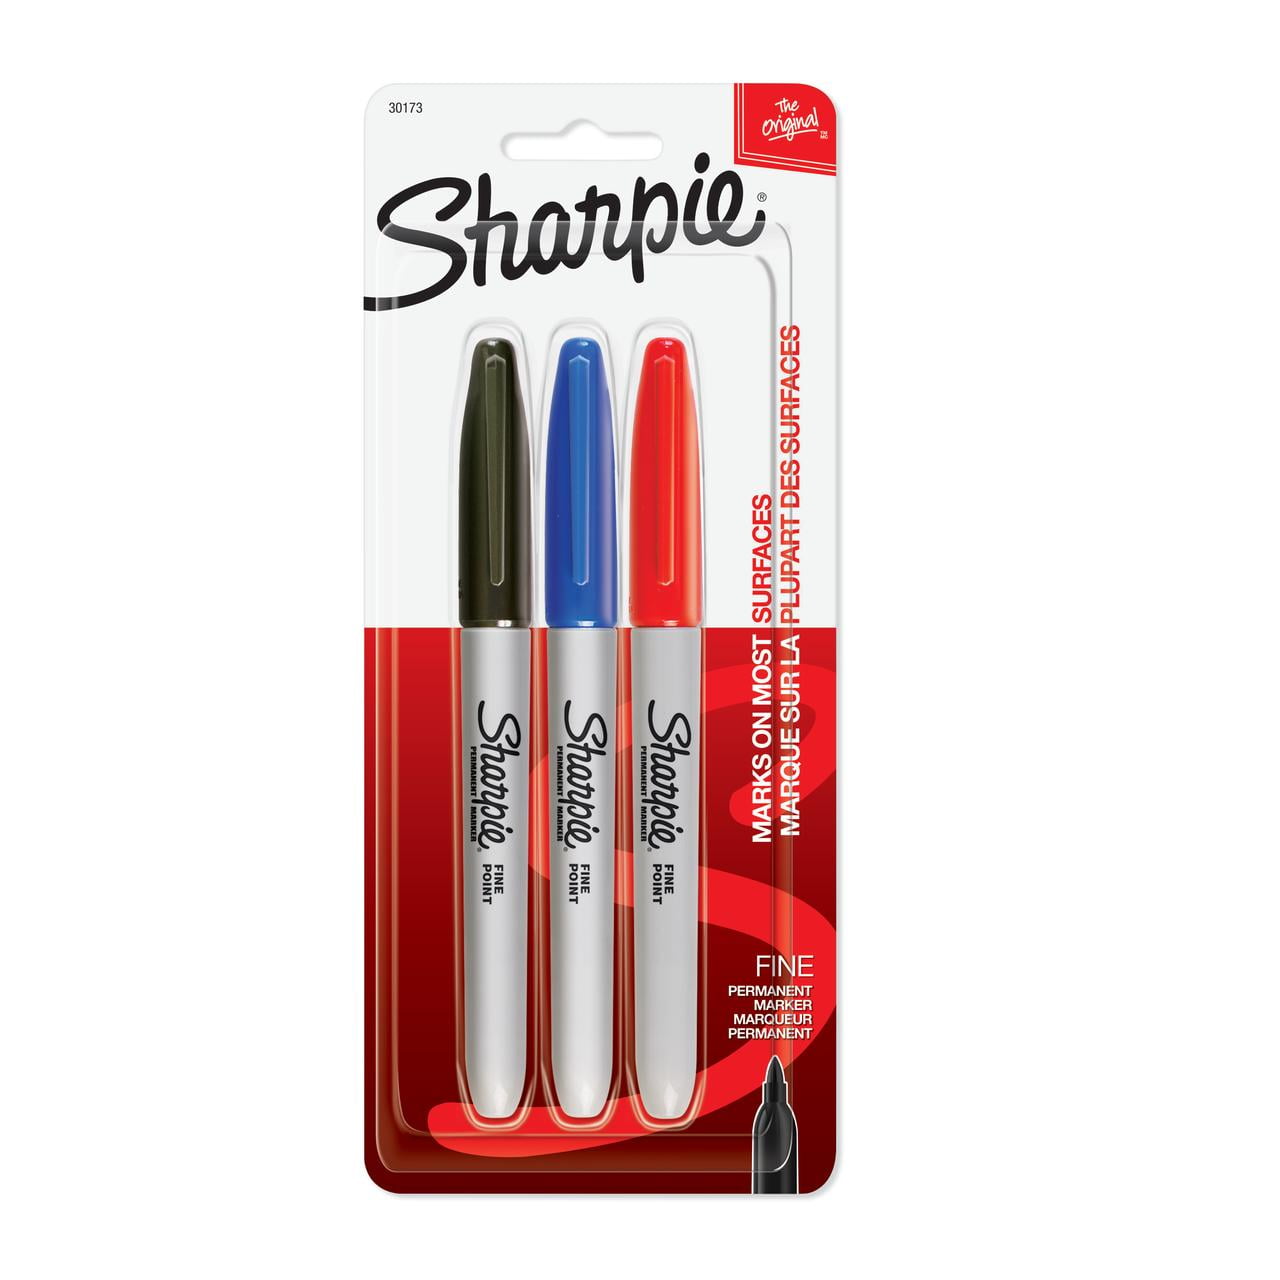 Permanent Markers,Shuttle Art 30 Pack Red Permanent Marker set,Fine Point,  Works